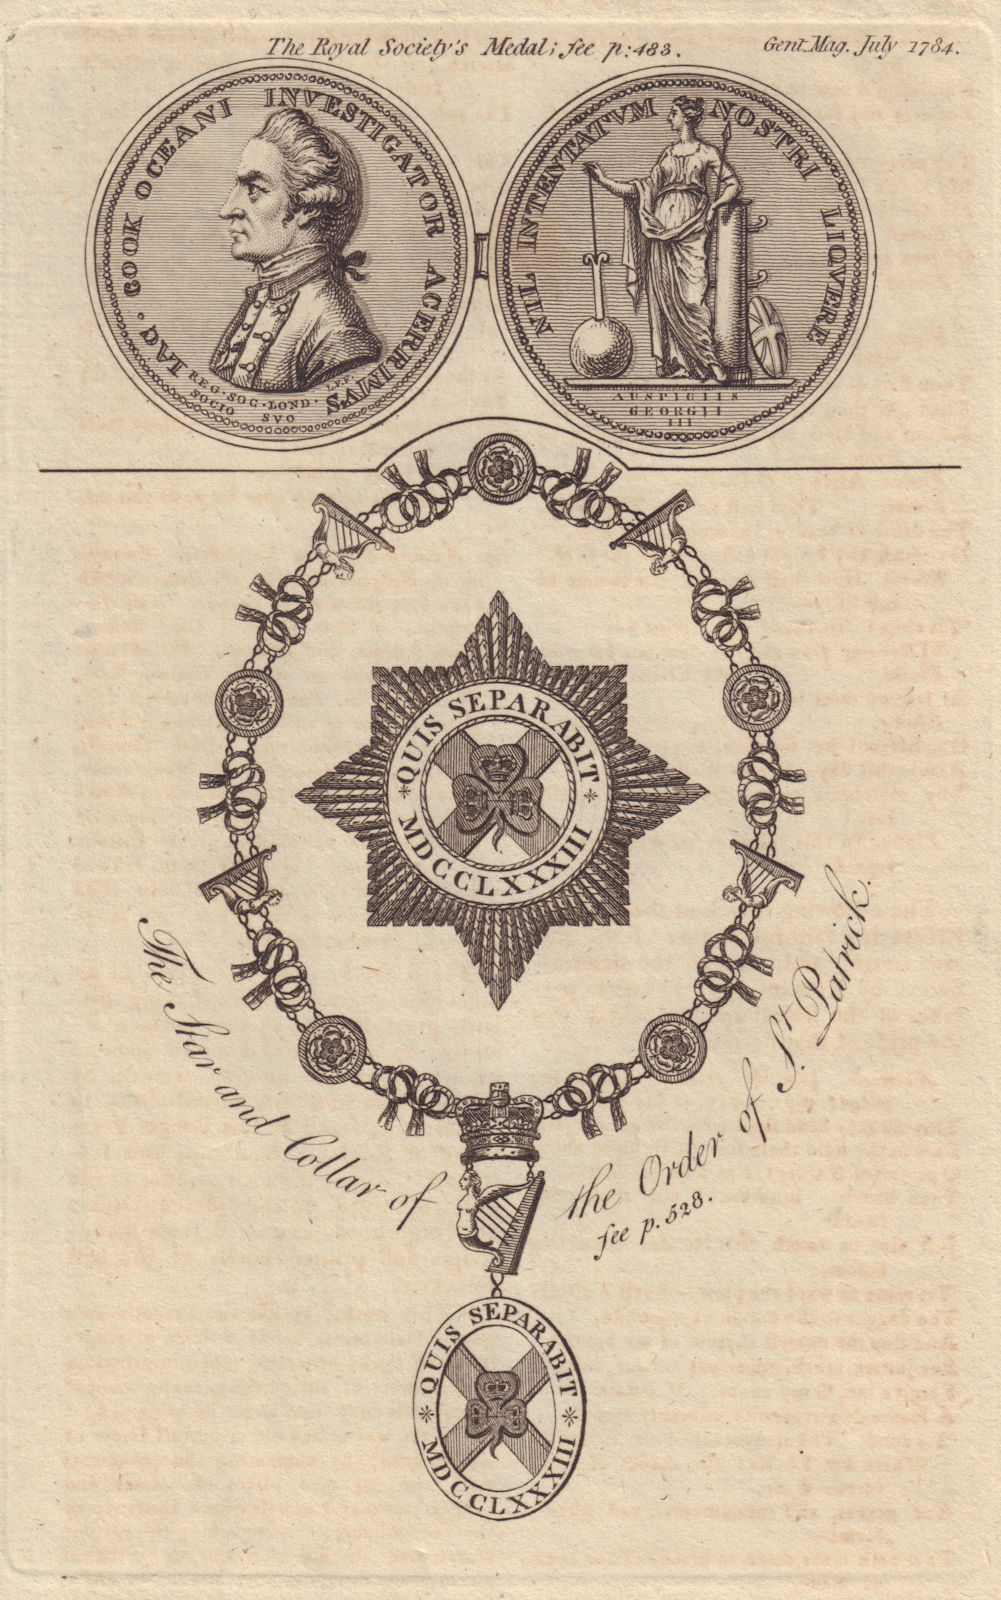 The Star & Collar of St Patrick. The Royal Society's Medal of Captain Cook 1784